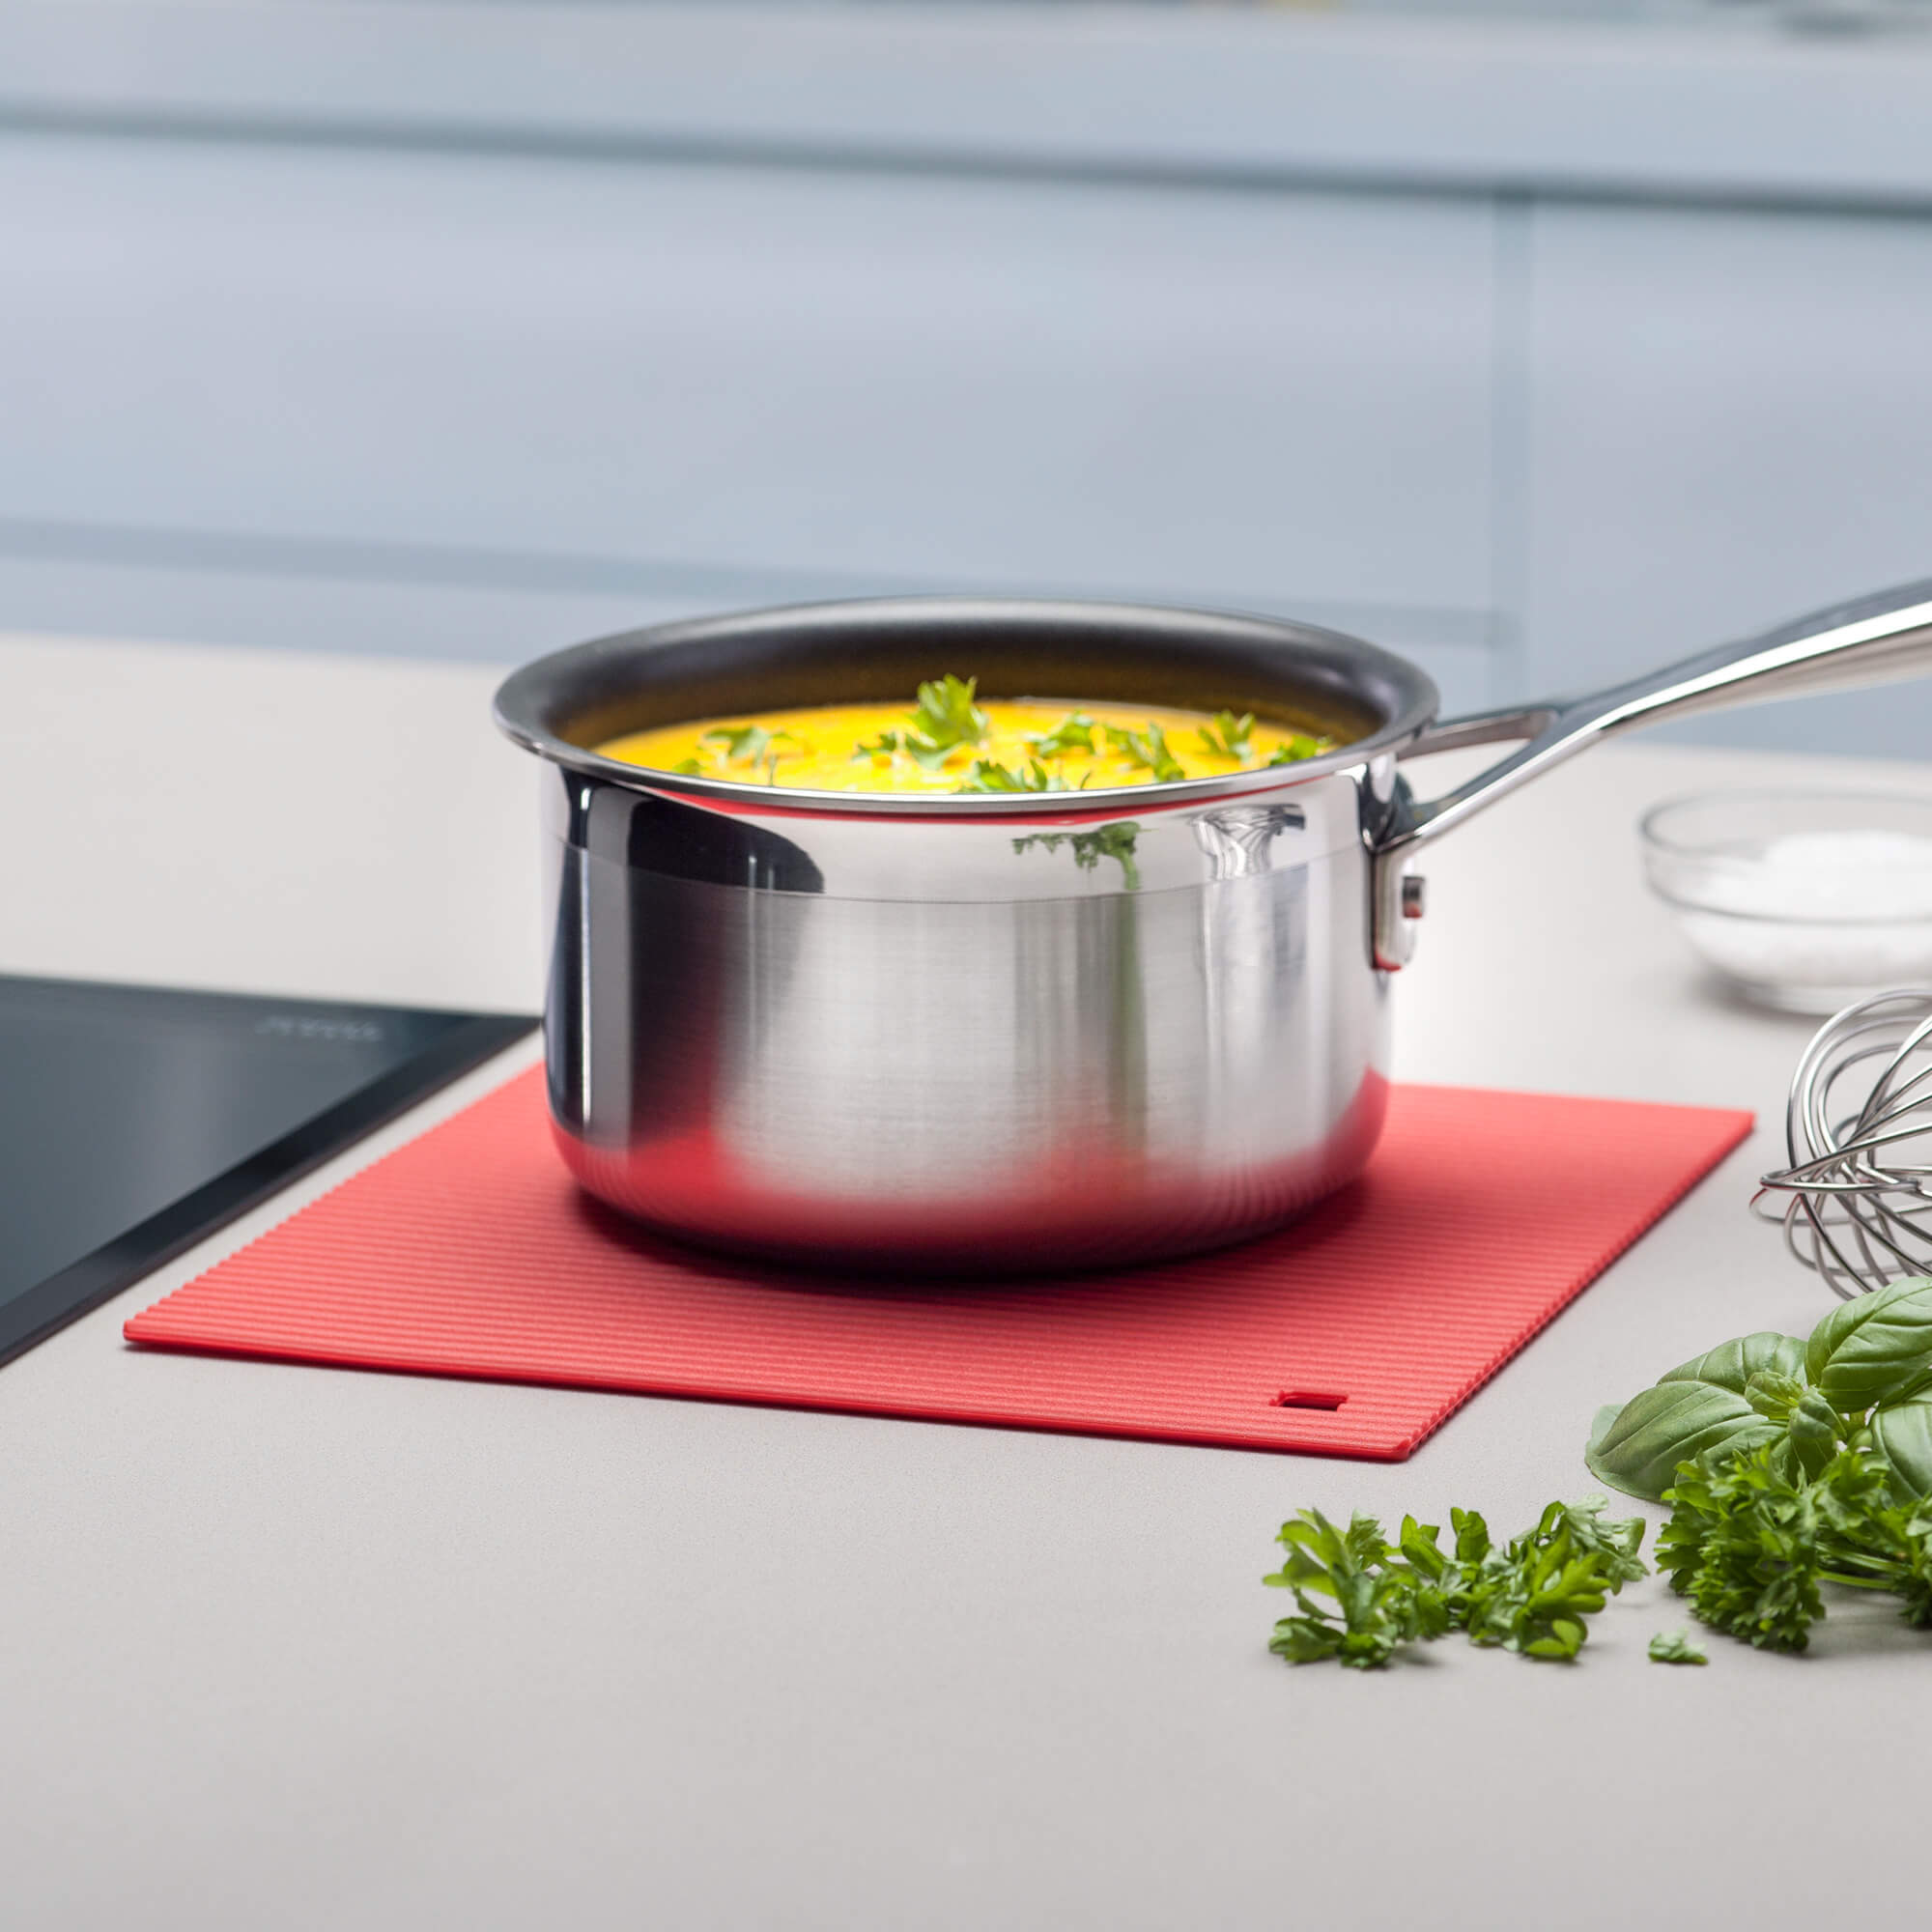 Zeal Silicone Hot Mat with a hot saucepan